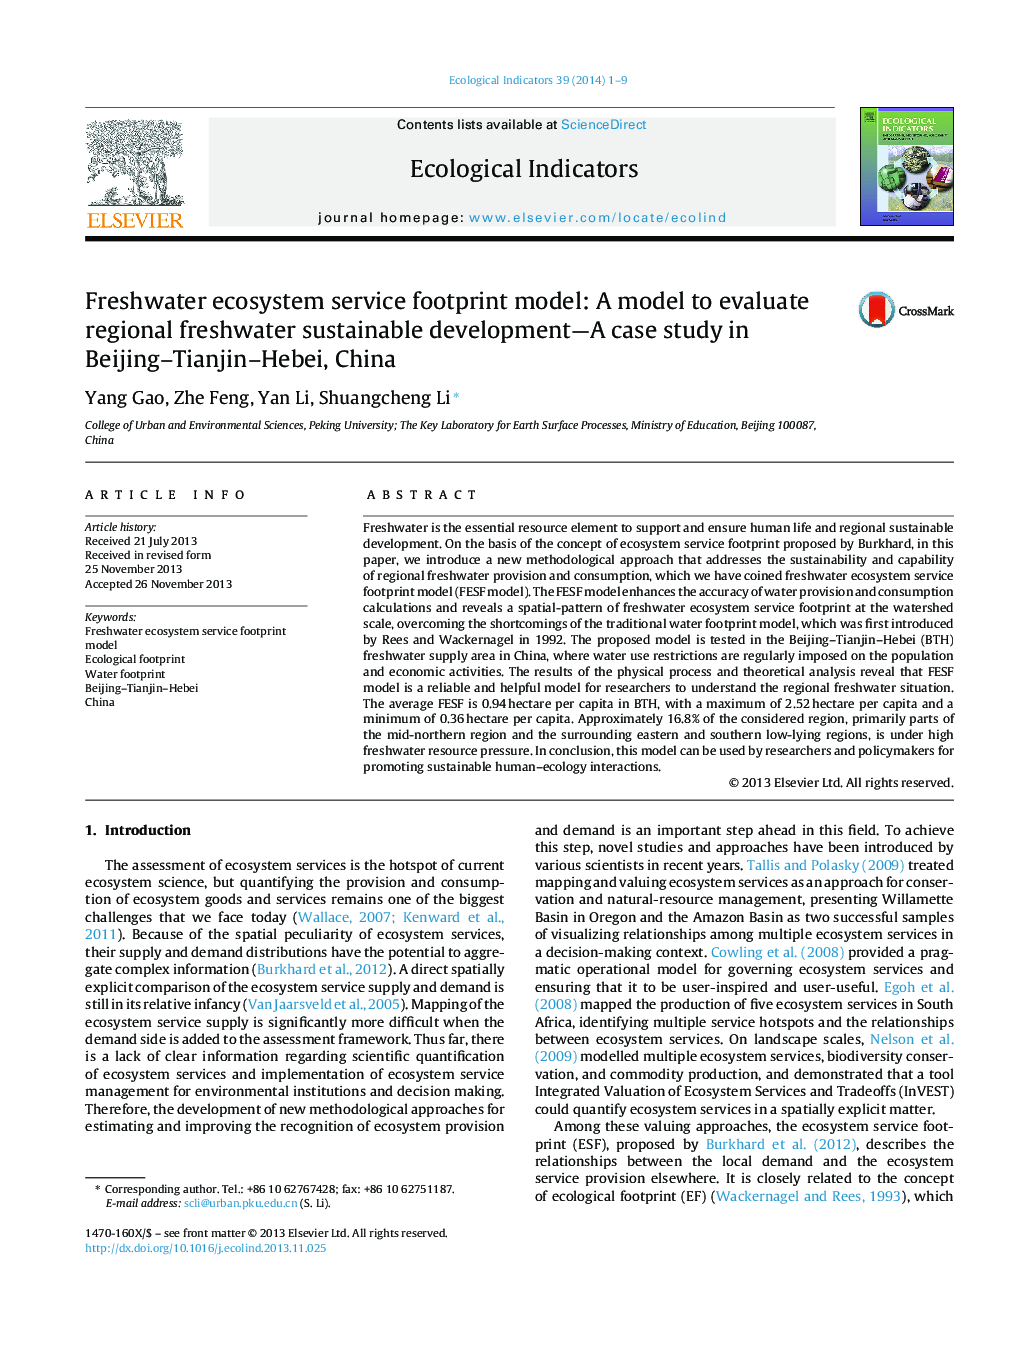 Freshwater ecosystem service footprint model: A model to evaluate regional freshwater sustainable development-A case study in Beijing-Tianjin-Hebei, China